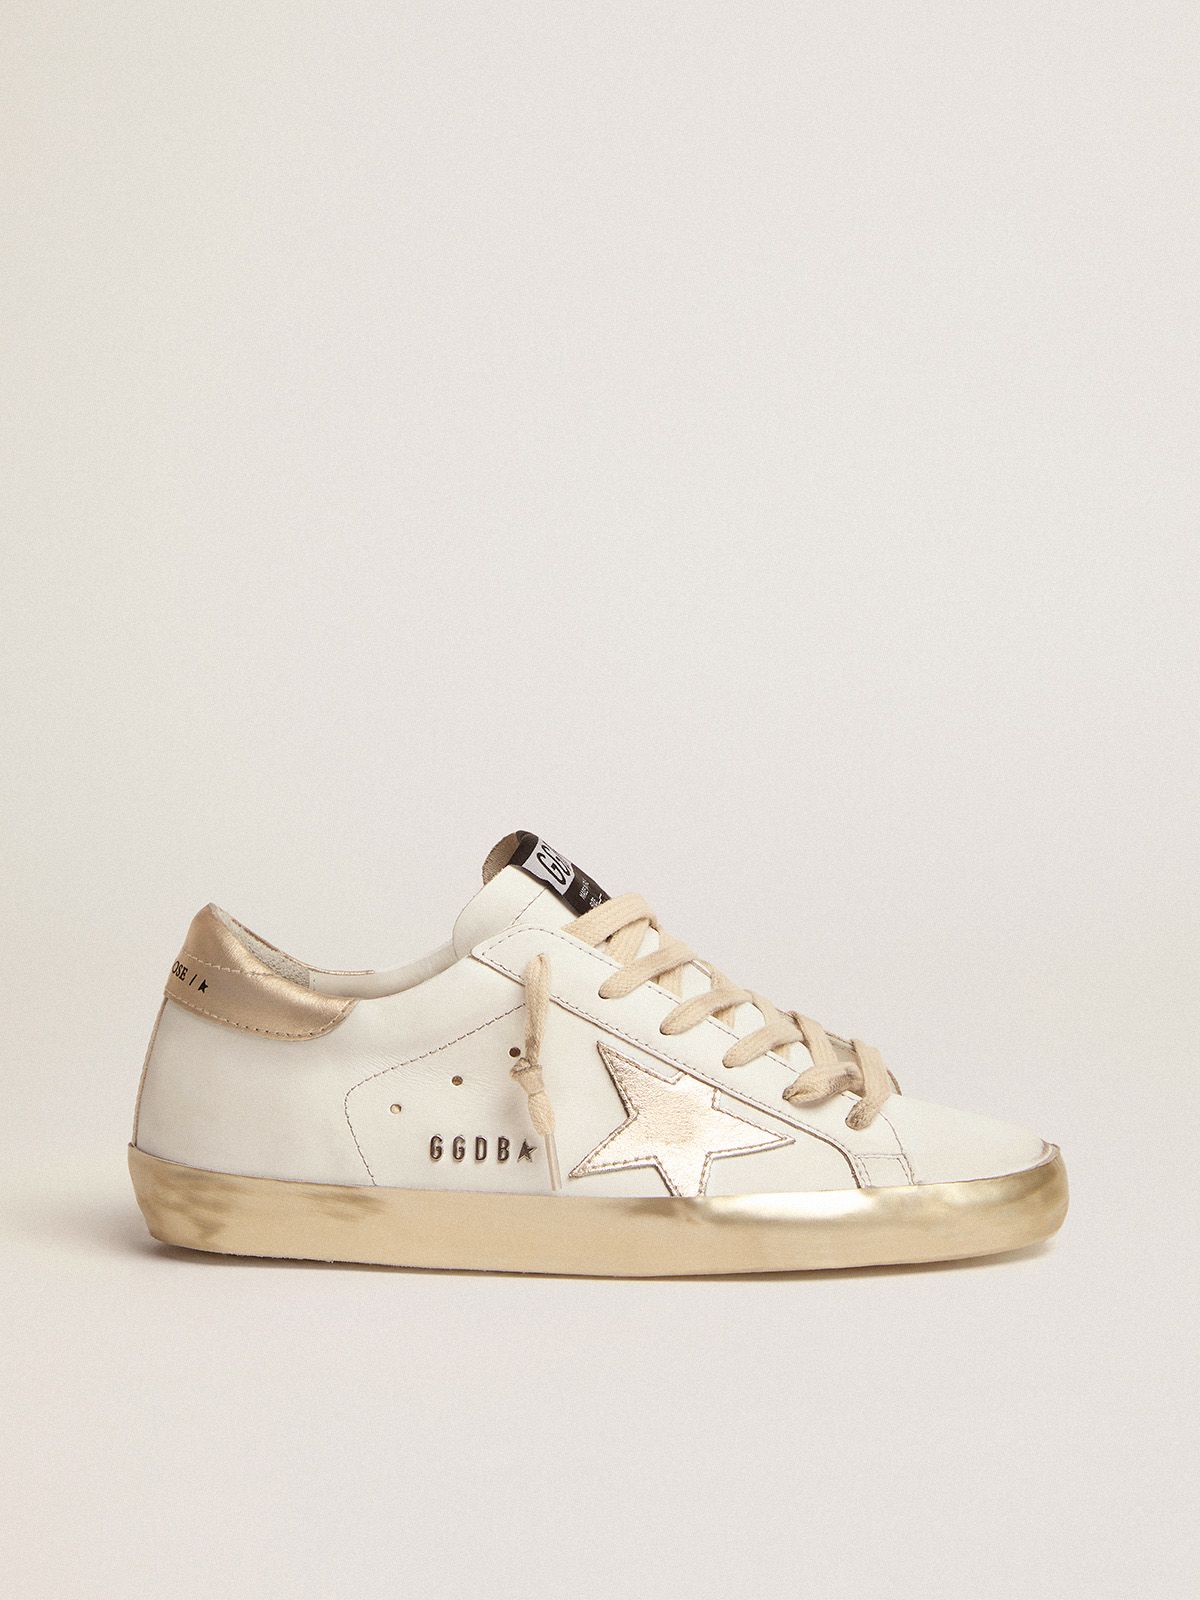 golden goose metal and stud with lettering gold foxing Super-Star sneakers sparkle